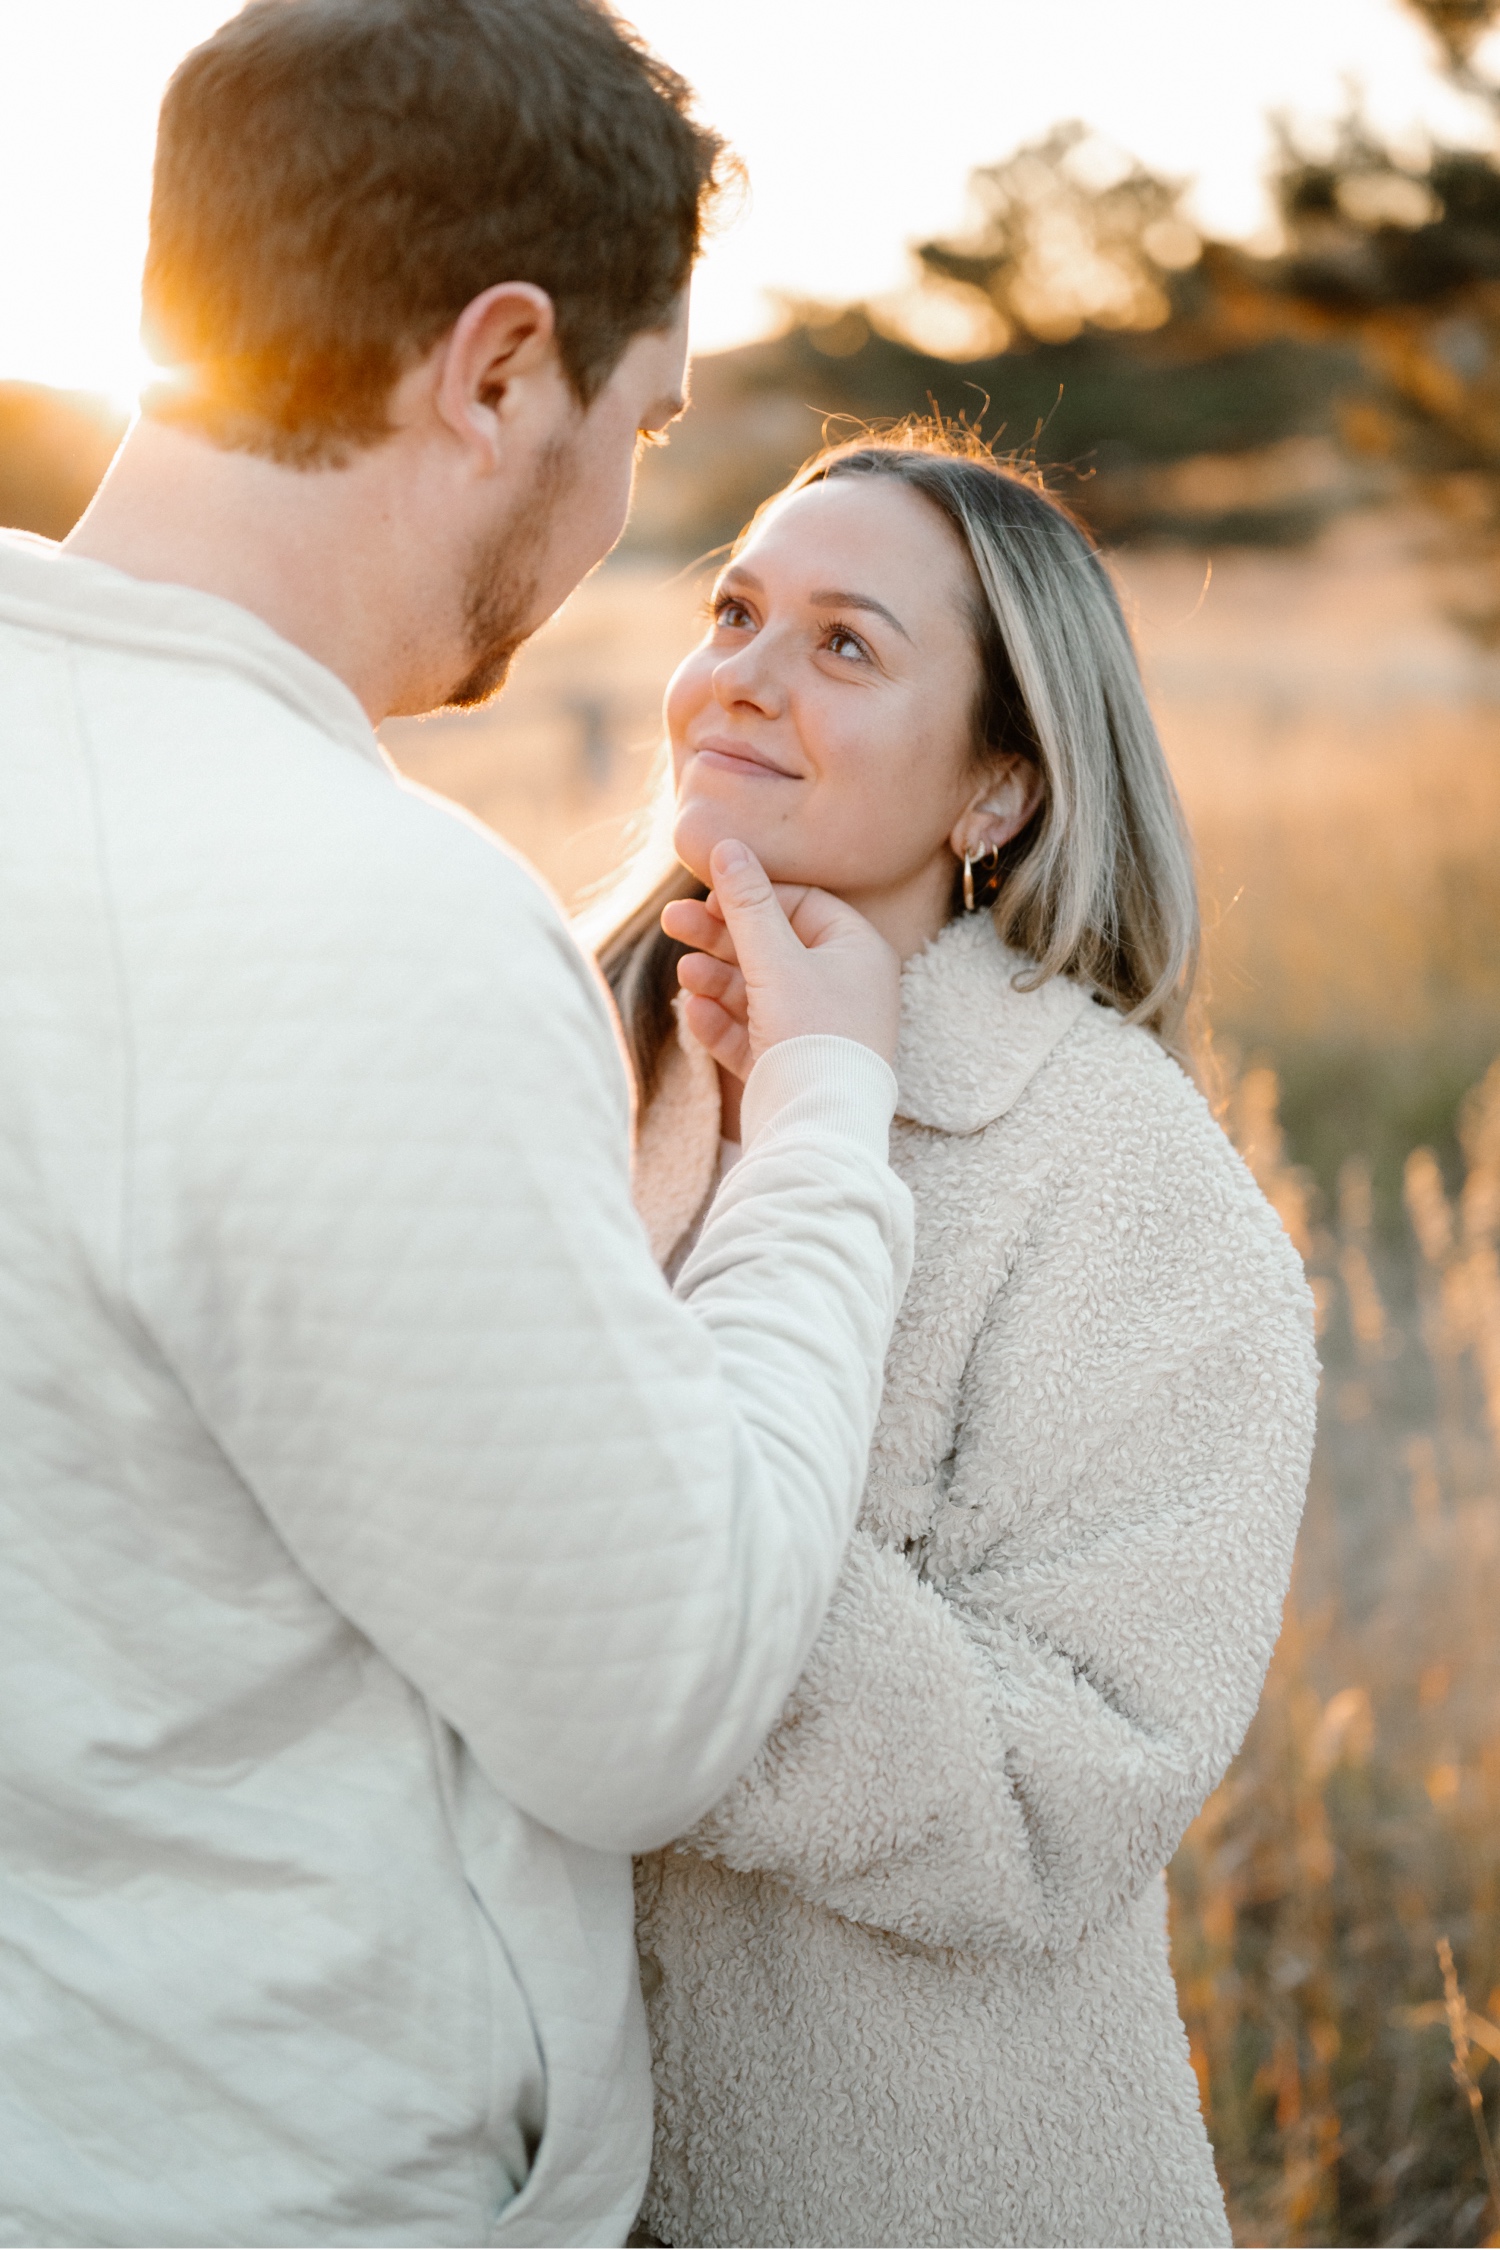 A photo of an engaged couple embracing each other in Elk Meadow Park in Evergreen, Colorado for their Colorado engagement photos, taken by Colorado wedding photographer Ashley Joyce Photography.